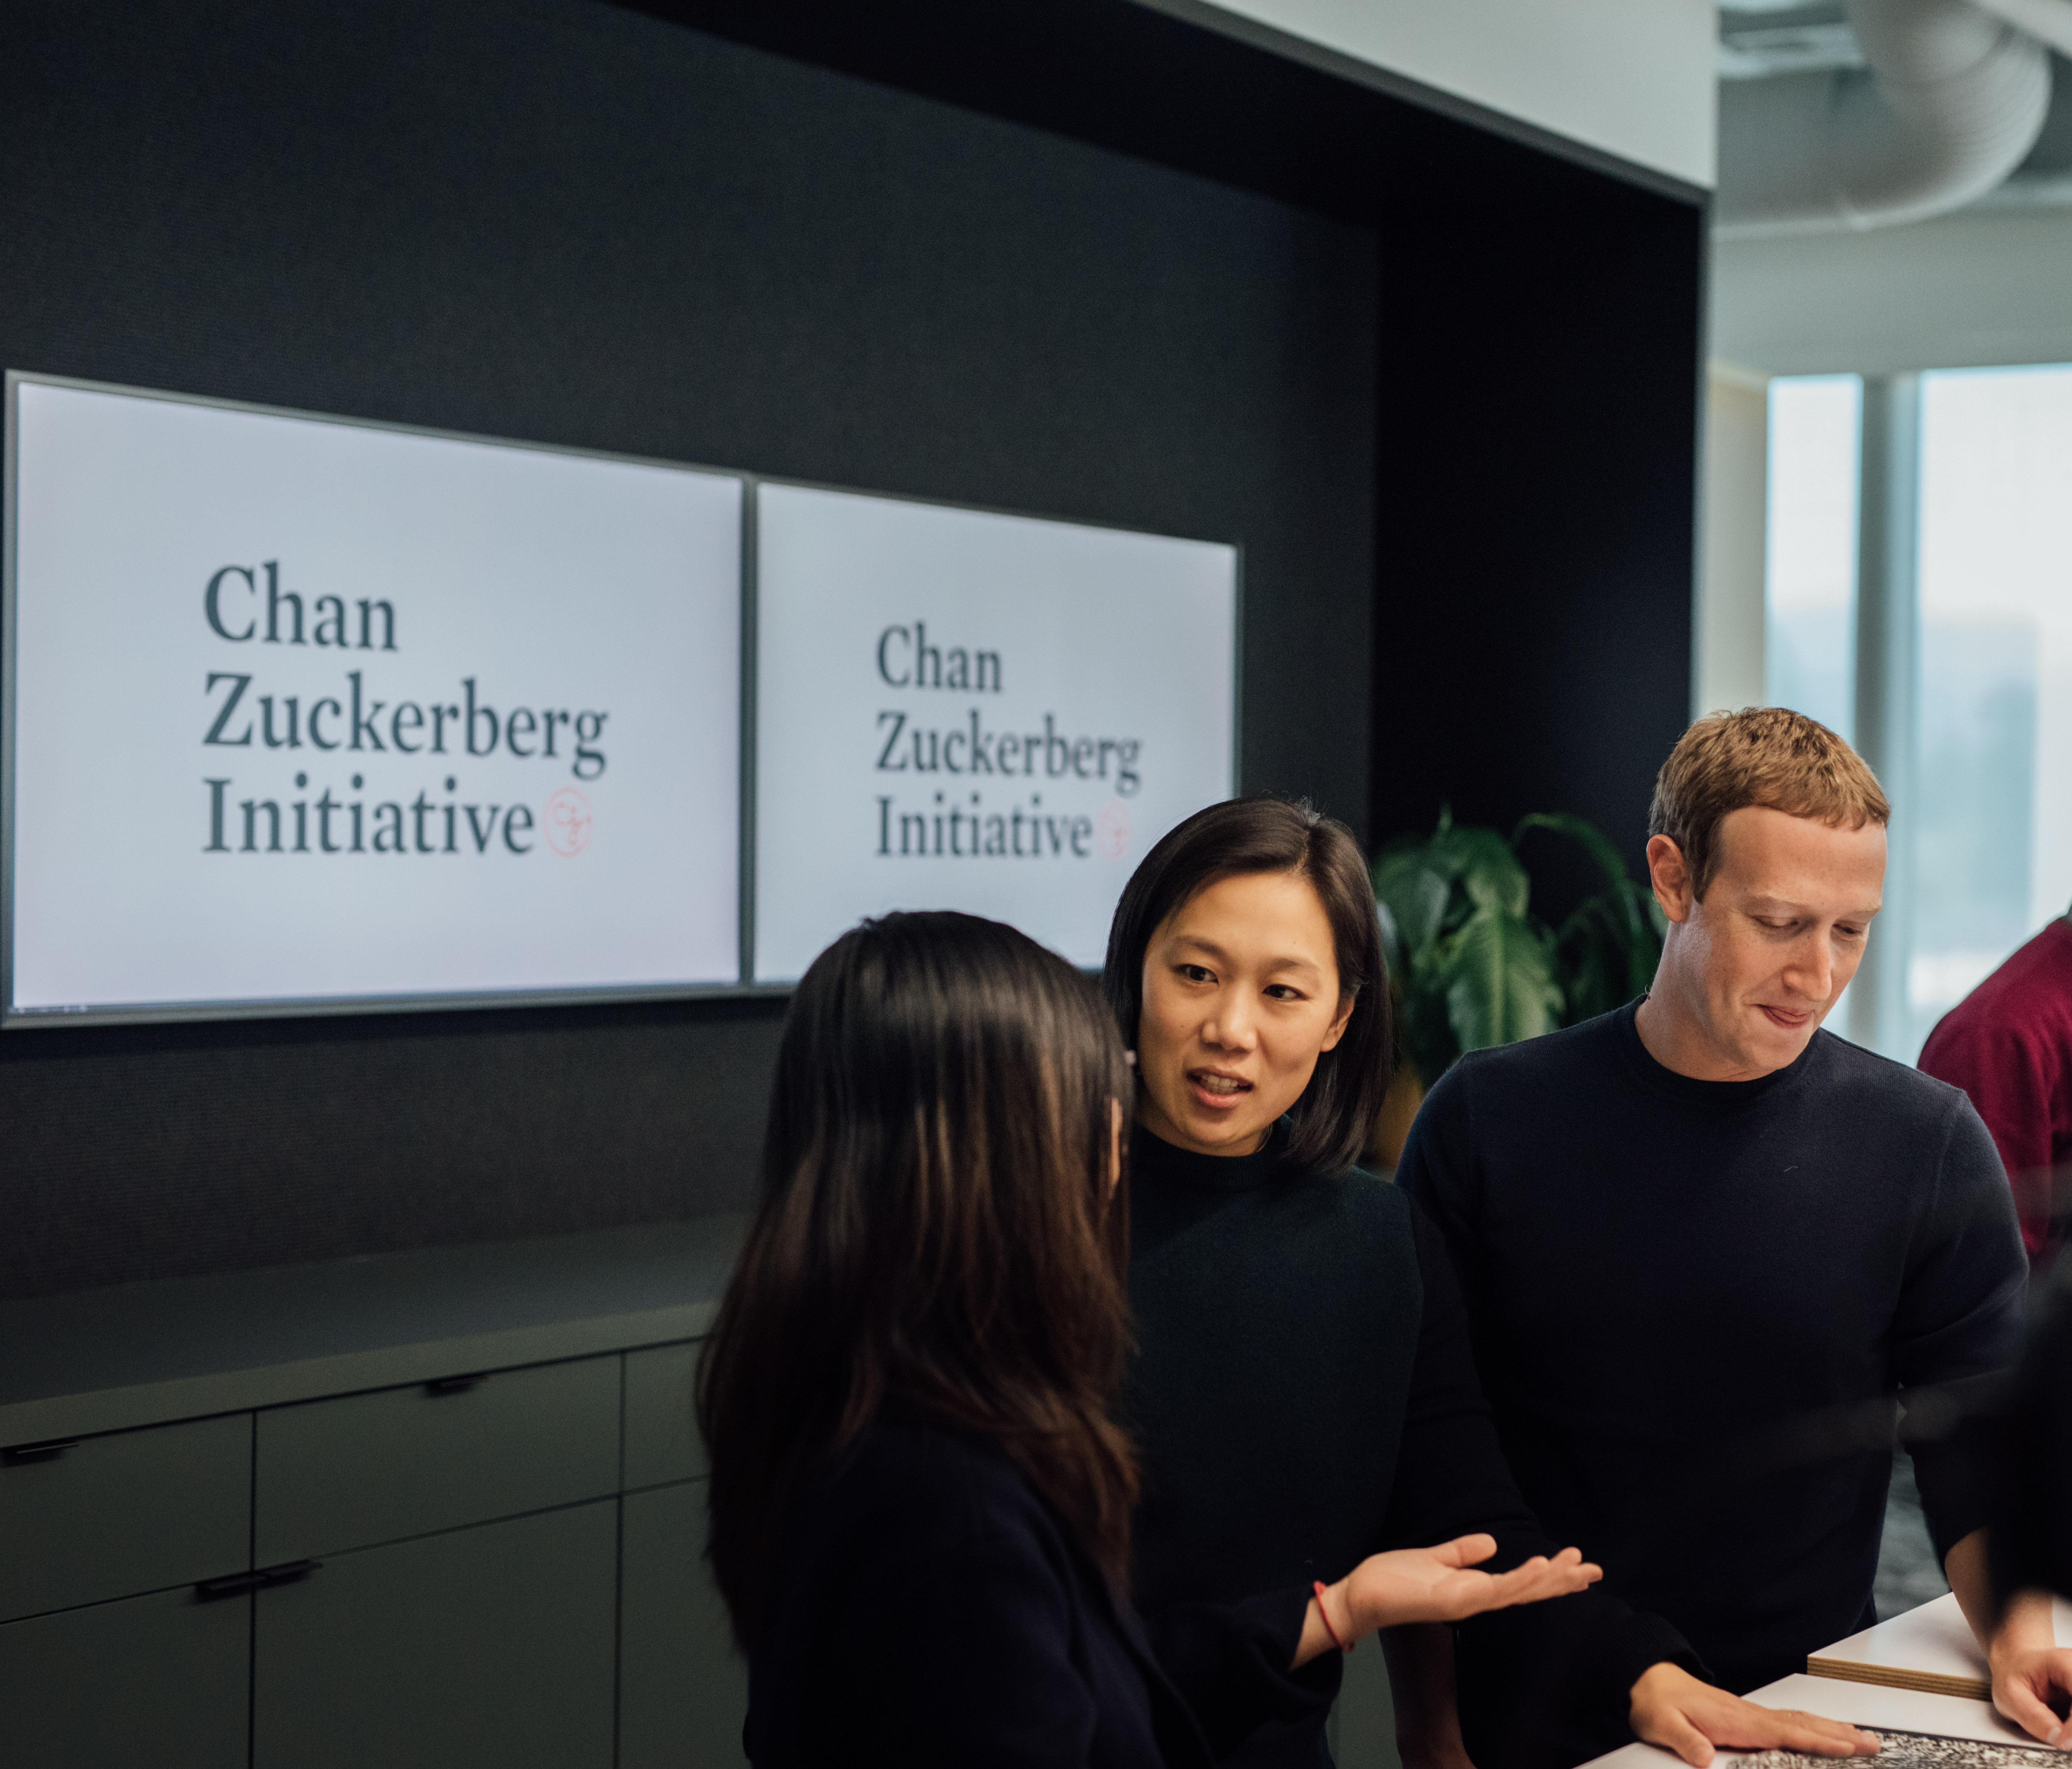 Priscilla Chan and Mark Zuckerberg speak with another person in front of a sign reading, “Chan Zuckerberg Initiative.”